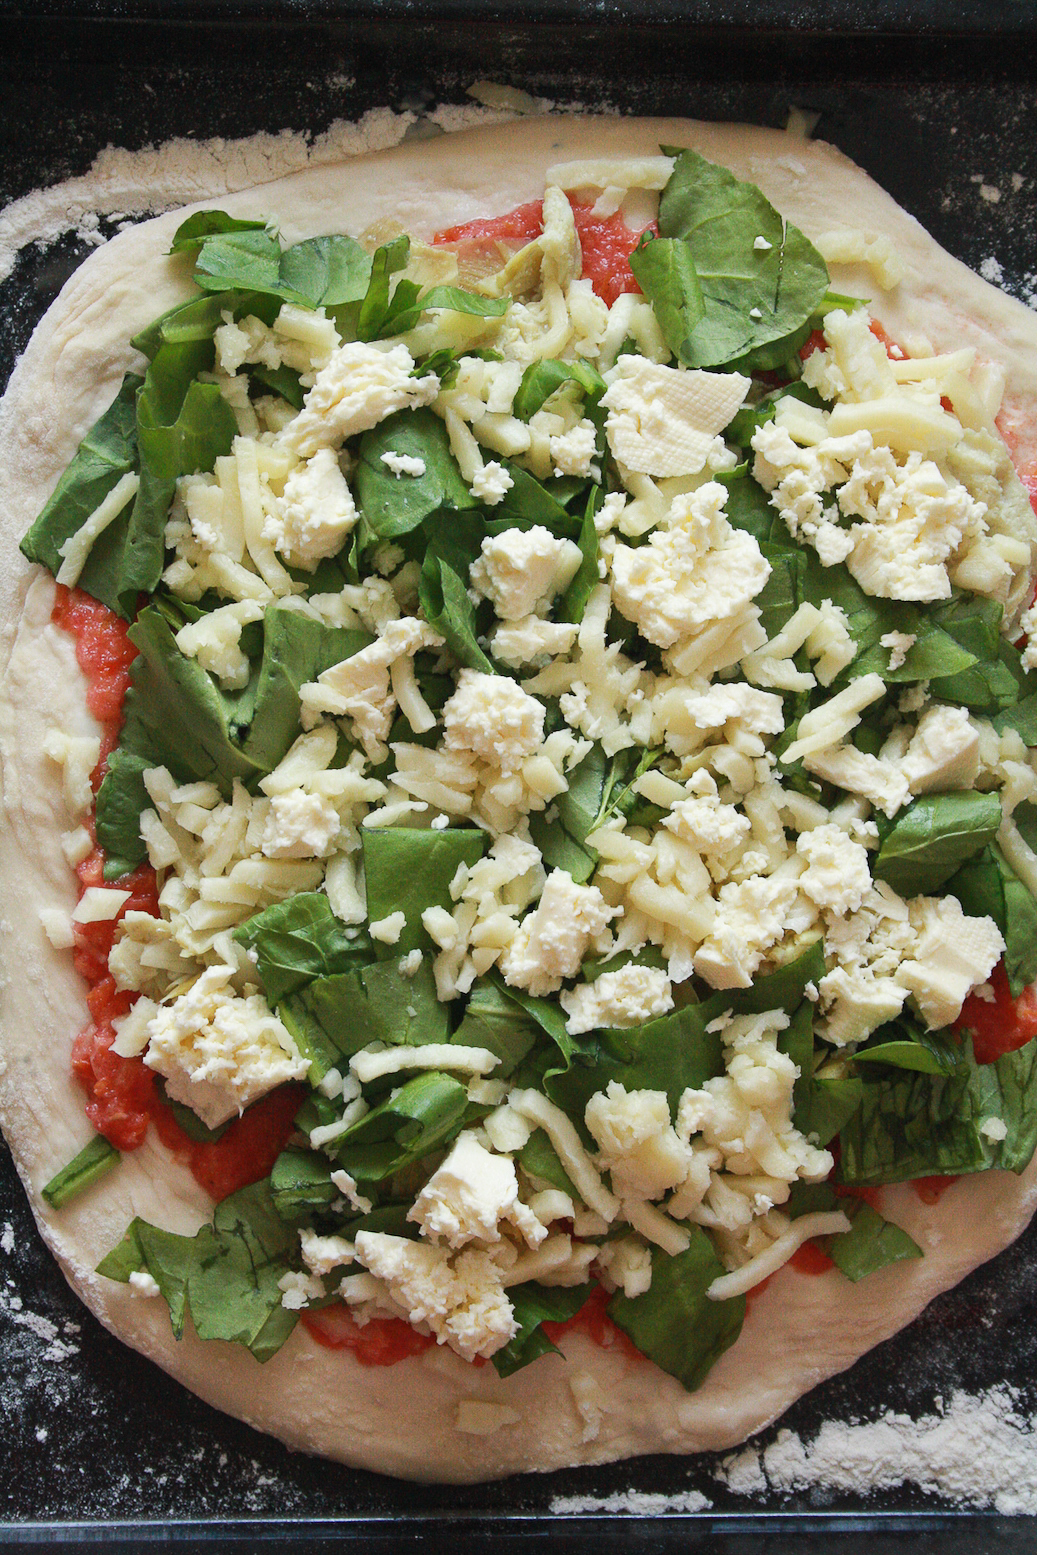 A chewy, deeply flavoured pizza crust topped with a simple tomato sauce, spinach and artichokes, plus lots of cheese!